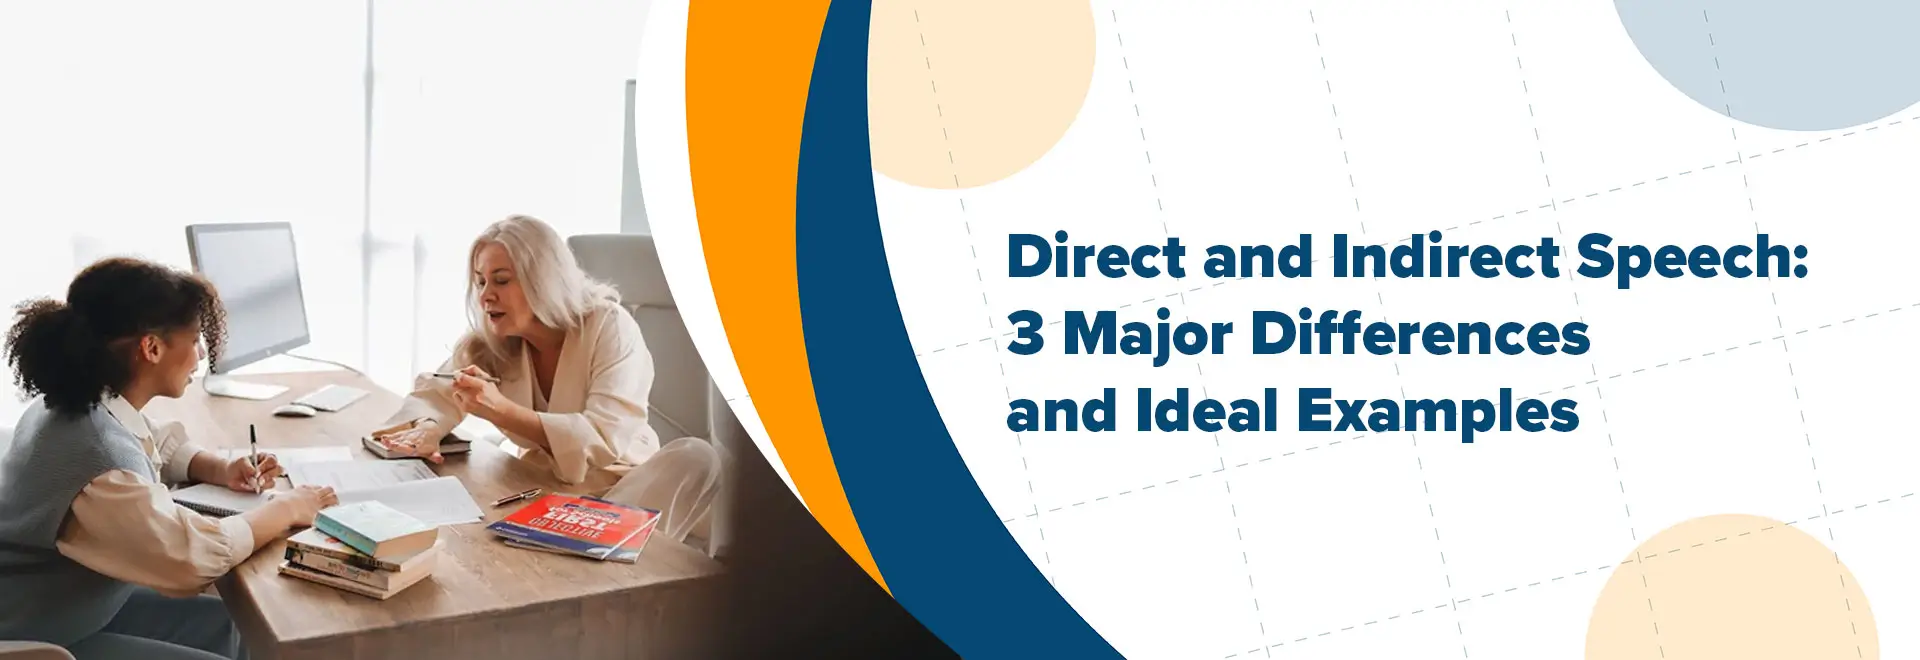 Direct and Indirect Speech: 3 Major Differences and Ideal Examples